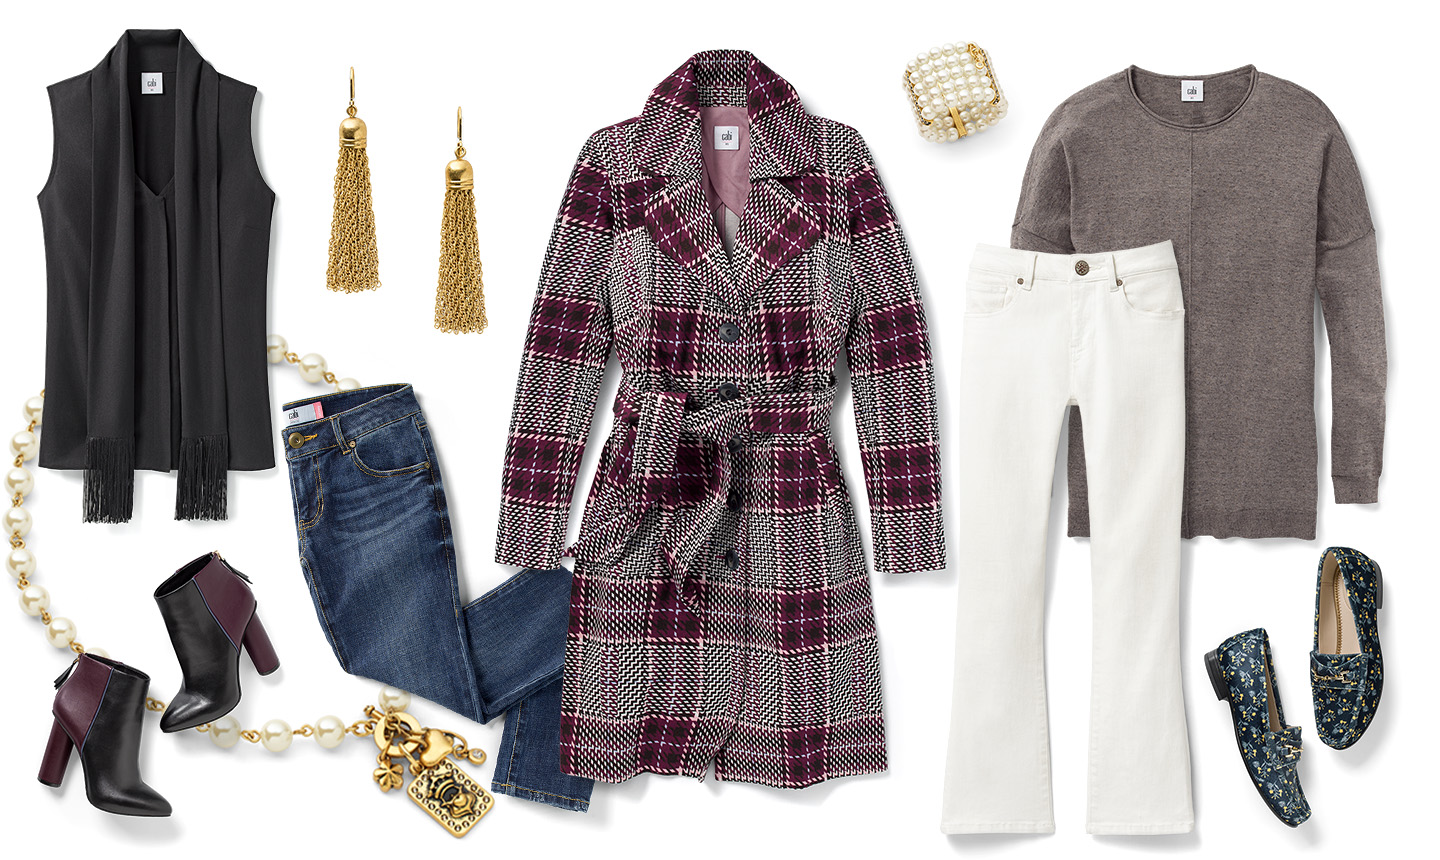 15 items, 30 fabulous fall outfits